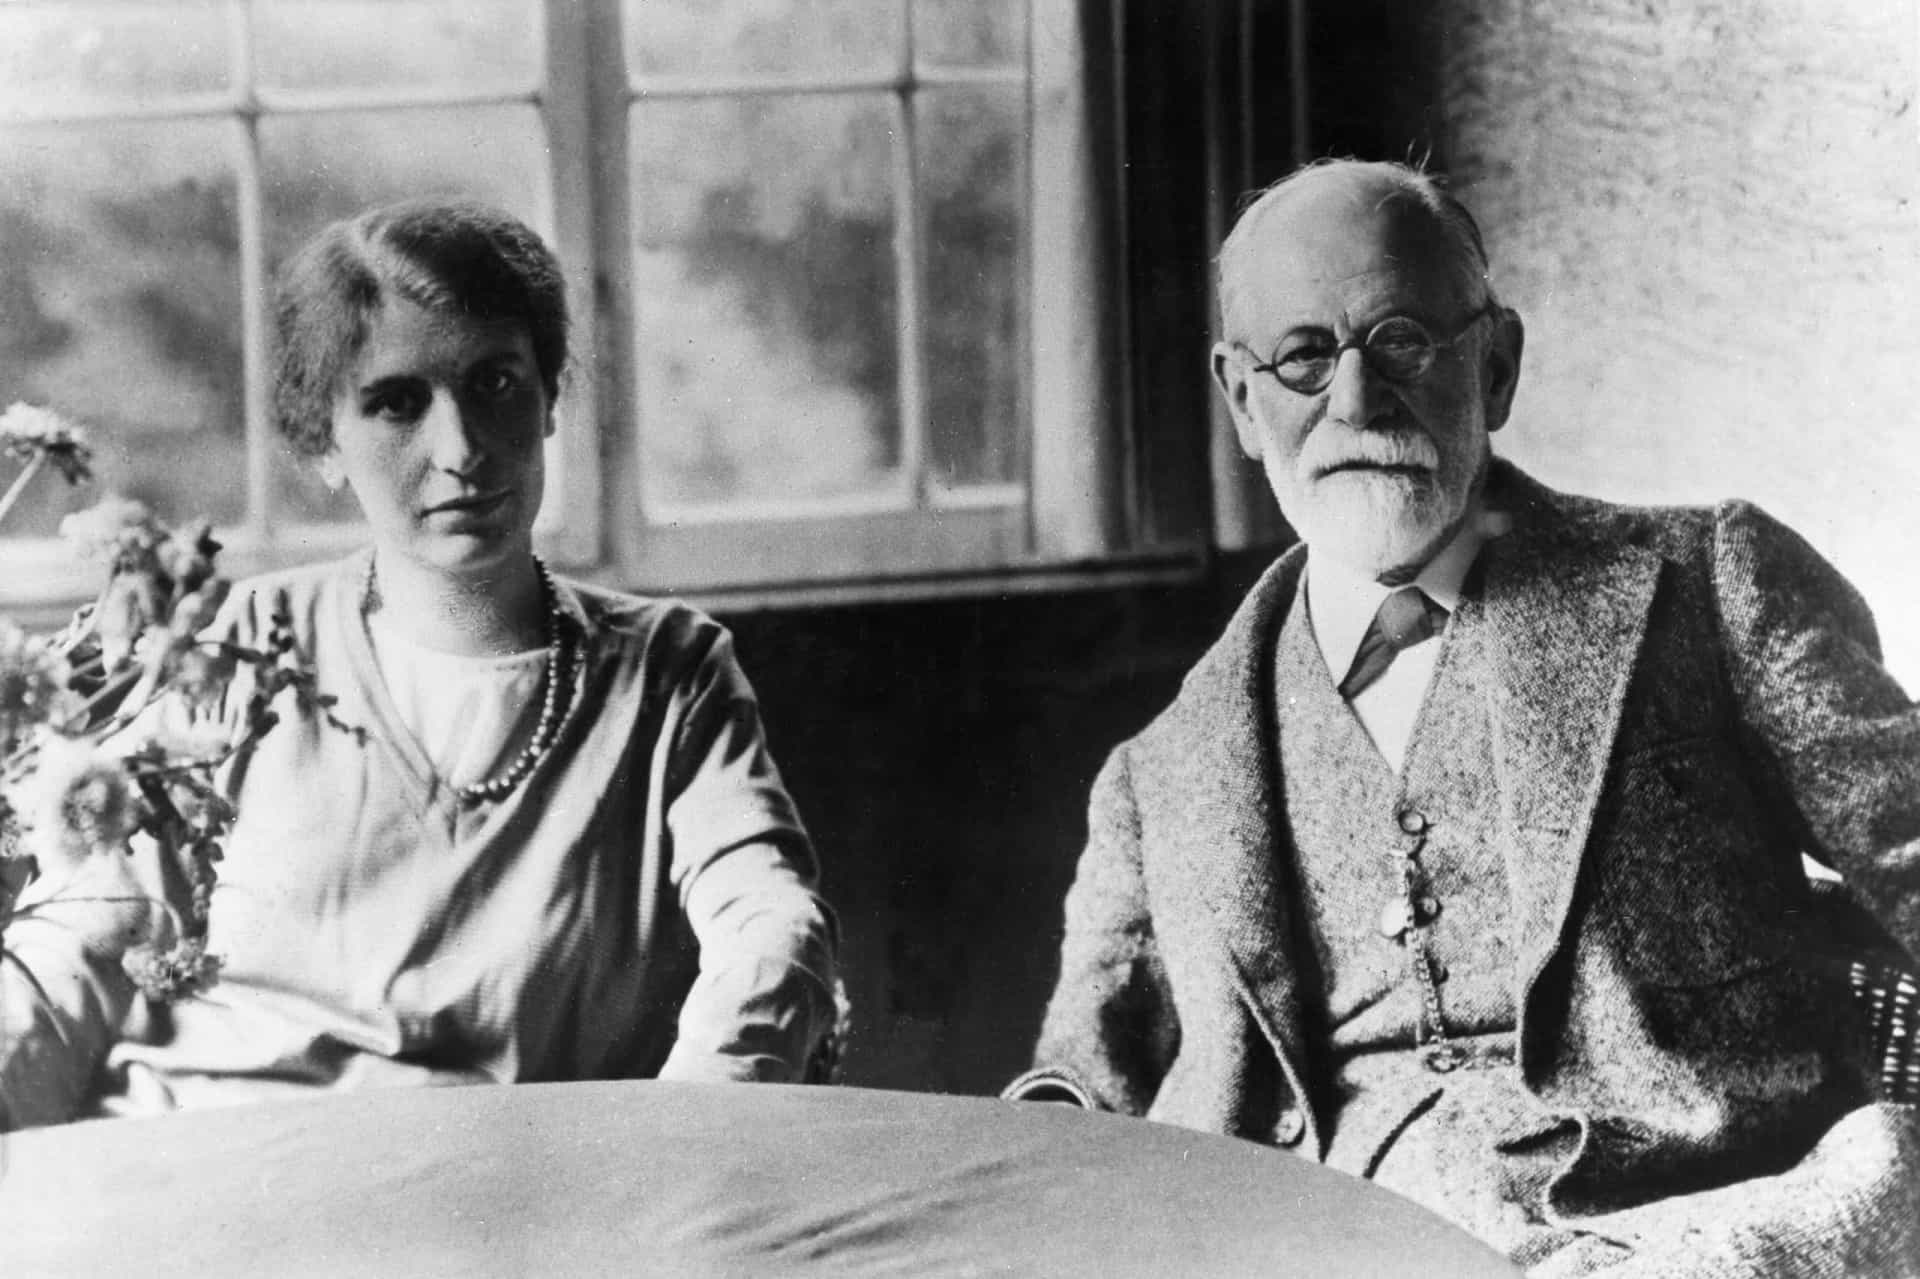 <p>Freud didn't see much potential in women, but ironically his daughter Anna went on to become a famous psychoanalyst in her own right. </p>